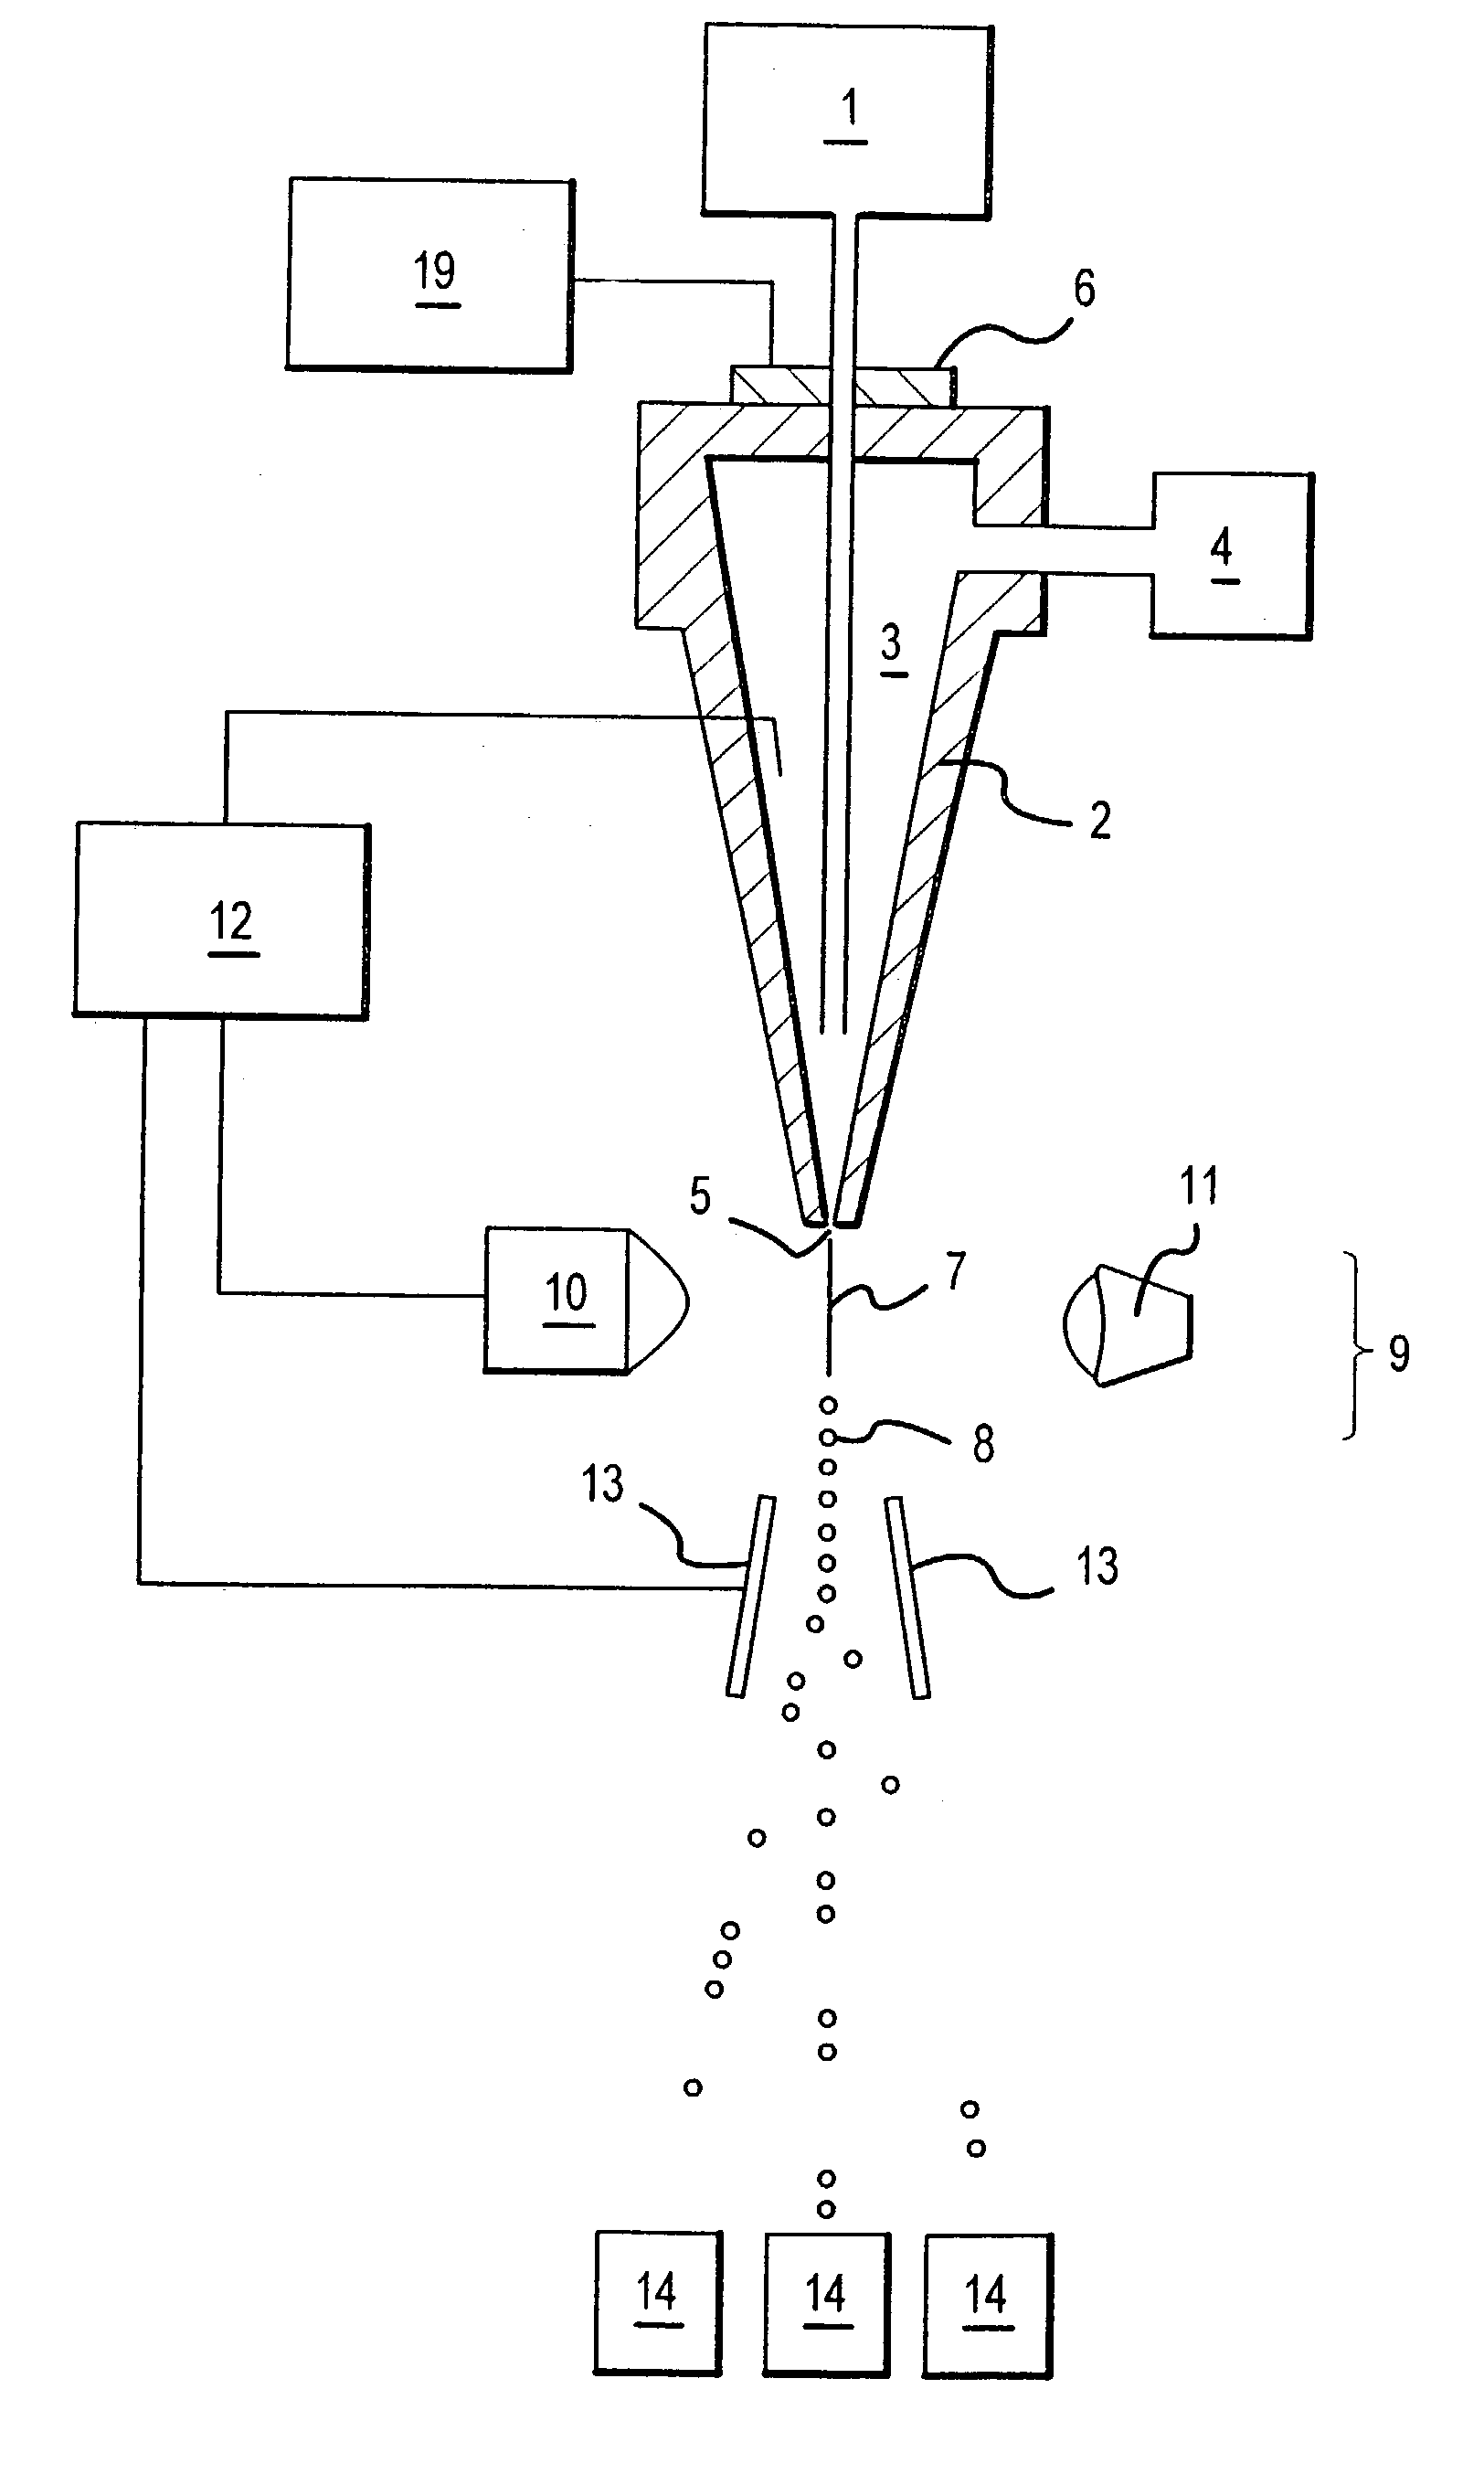 Collection systems for cytometer sorting of sperm